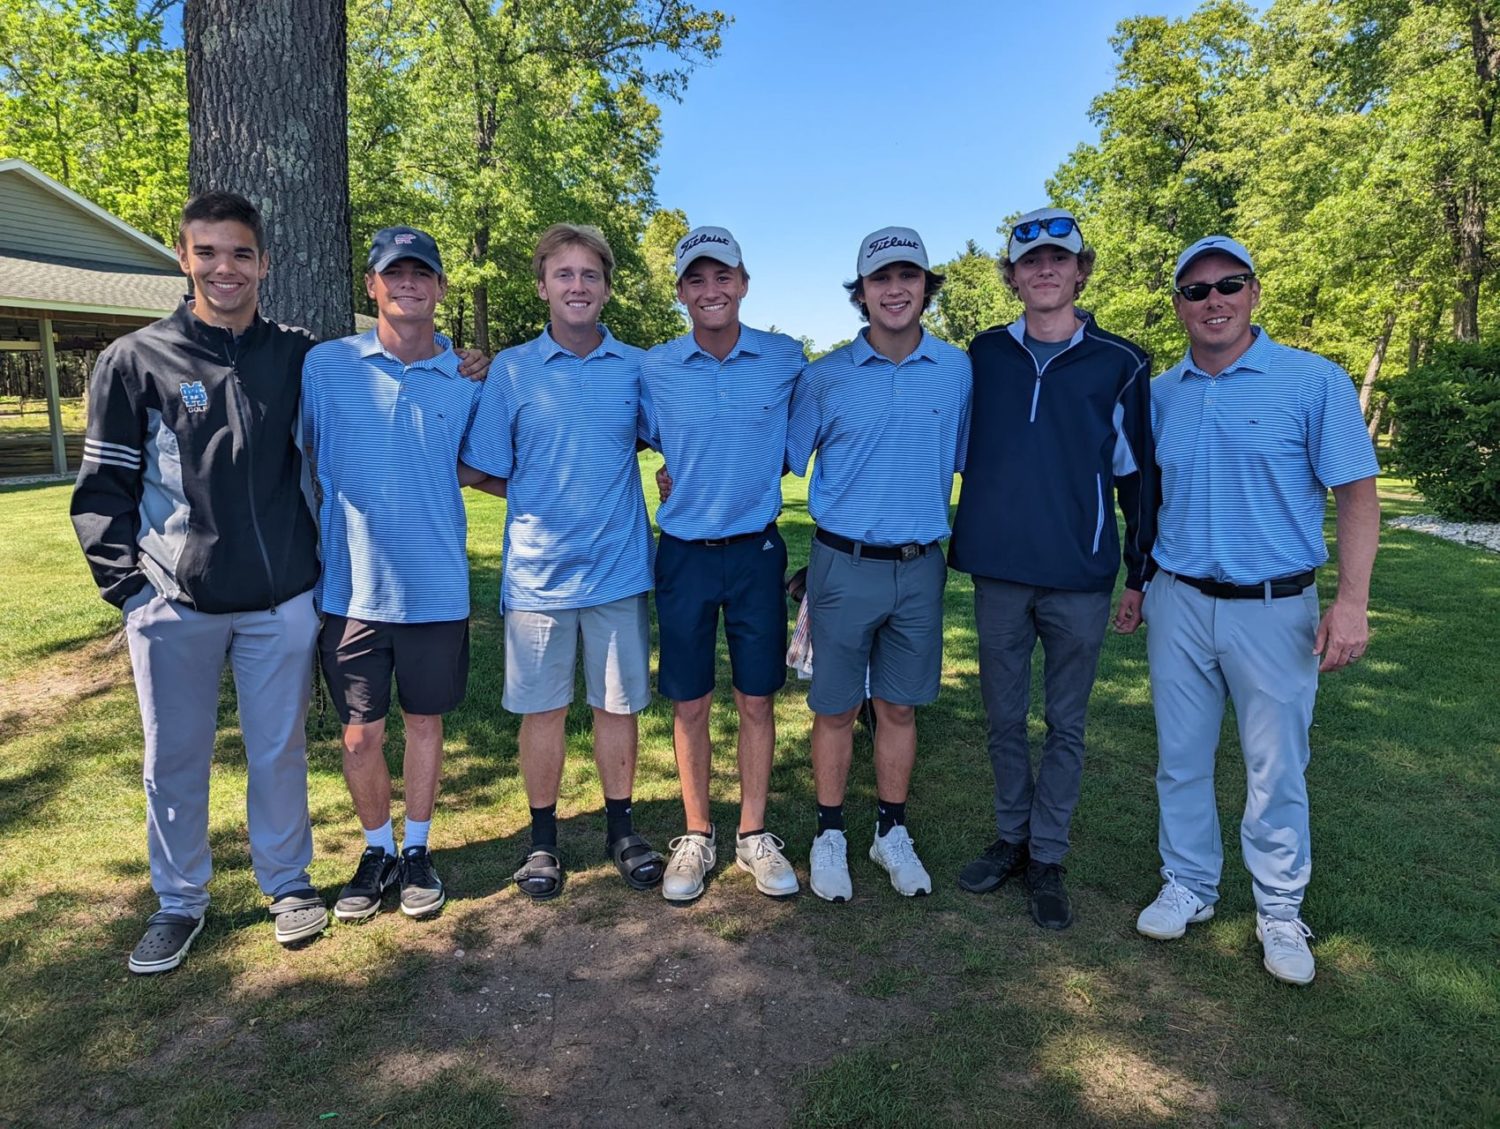 Mona Shores finishes runner-up in Division 1 regional headed for state finals next weekend